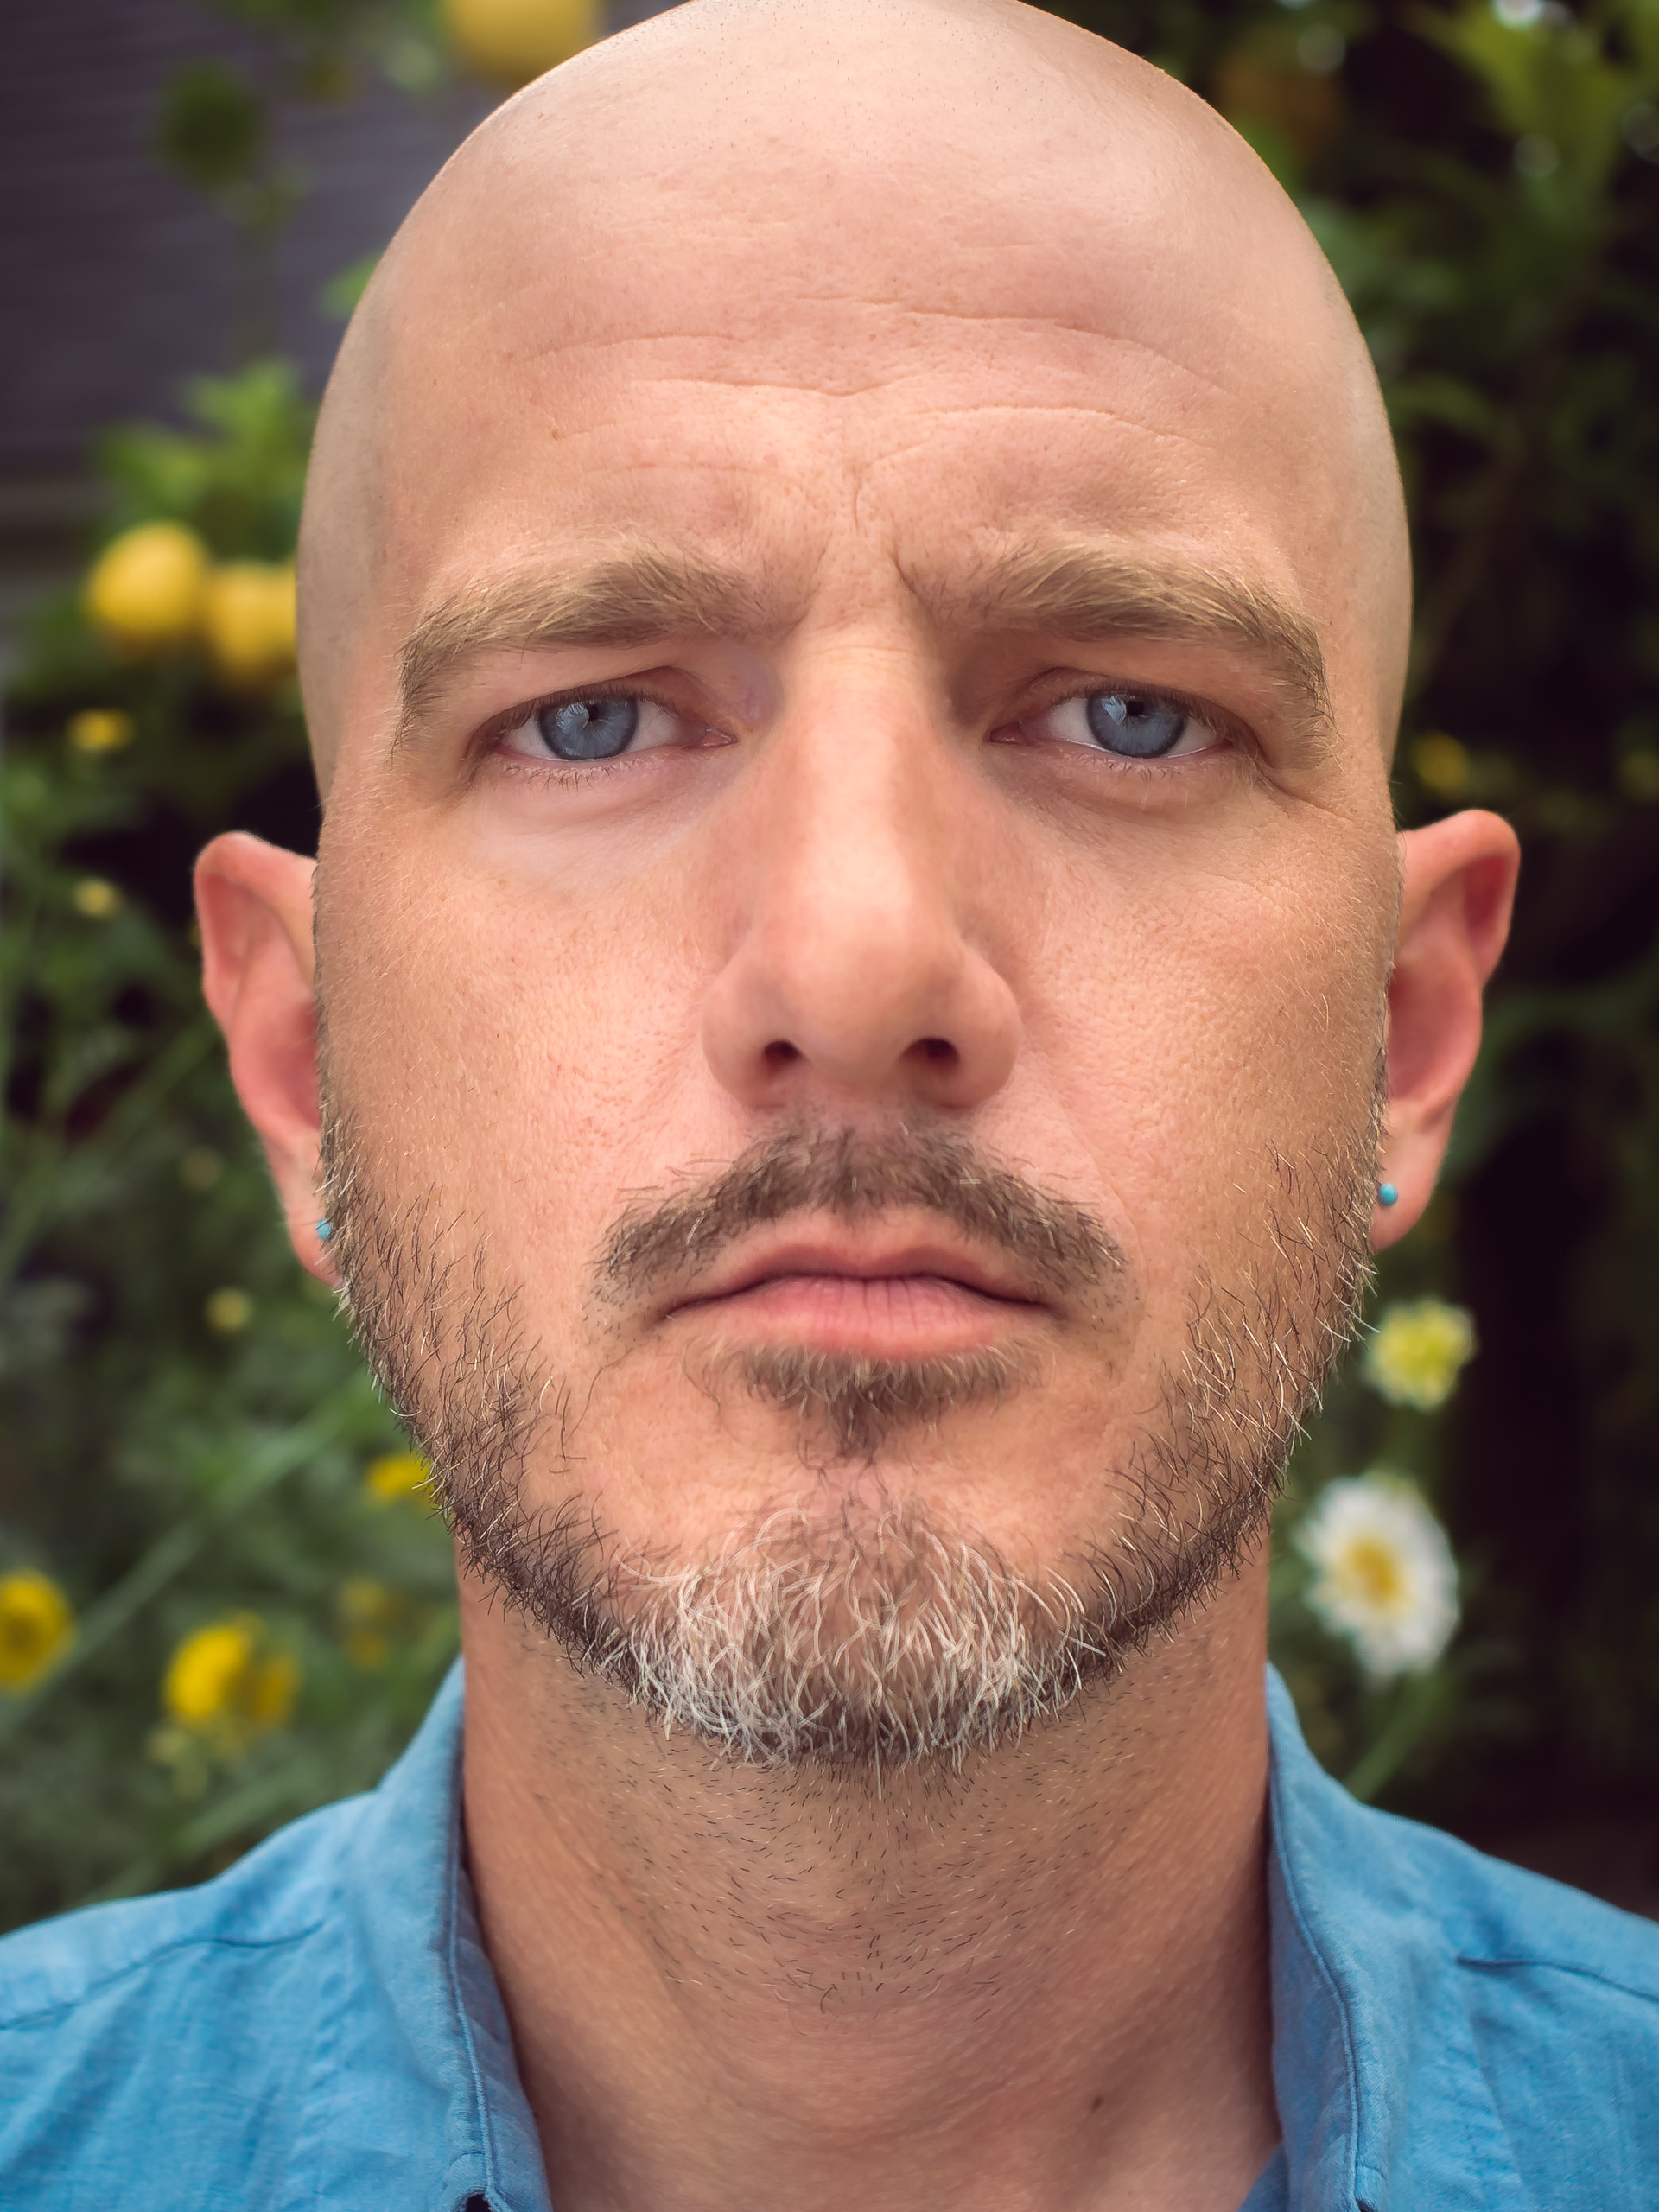 Self portrait of Los Angeles lifestyle and portrait photographer Ken Morris. It's a closely cropped image, Ken looks directly a the camera with a somber expression. He is bald with a short beard and Ken Morris wears a blue shirt. Flowers are behind him.